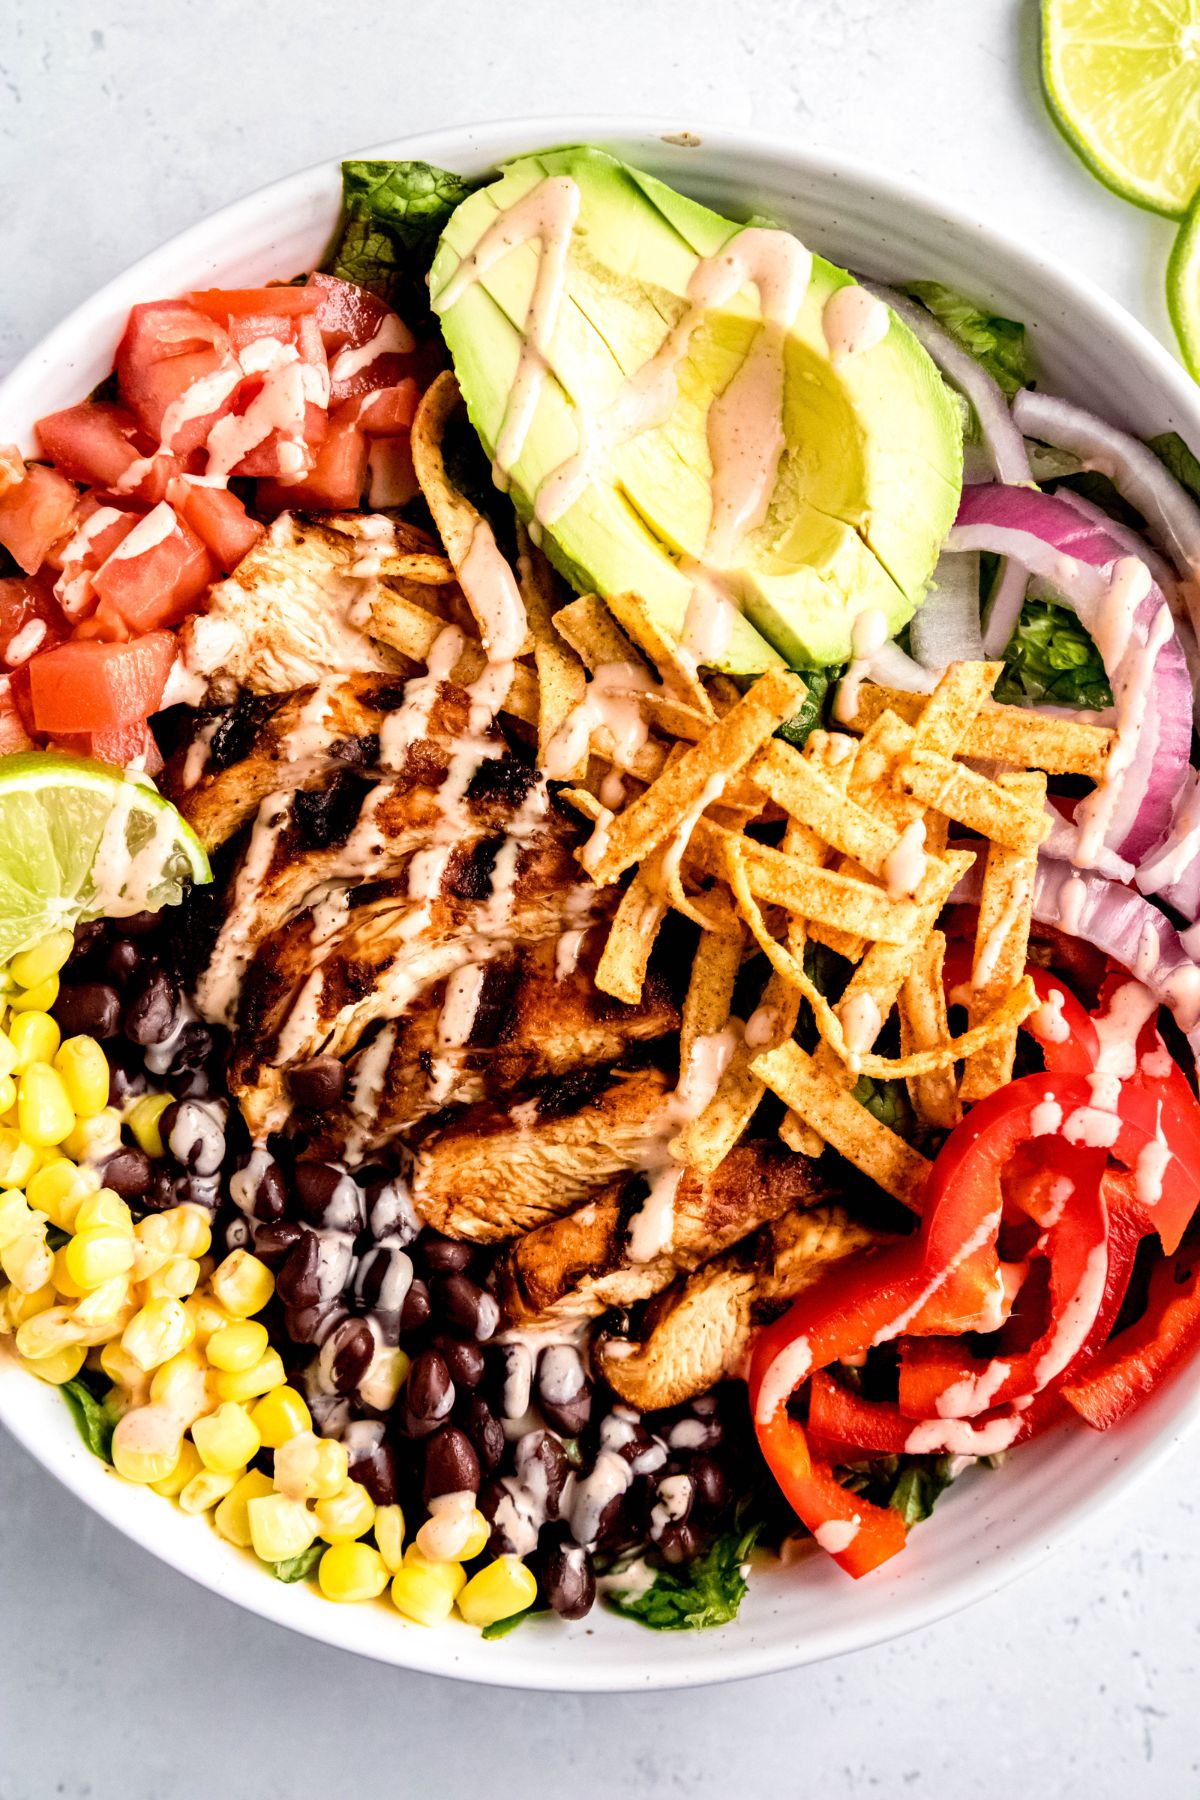 A bowl of salad loaded with spicy southwestern flavors.